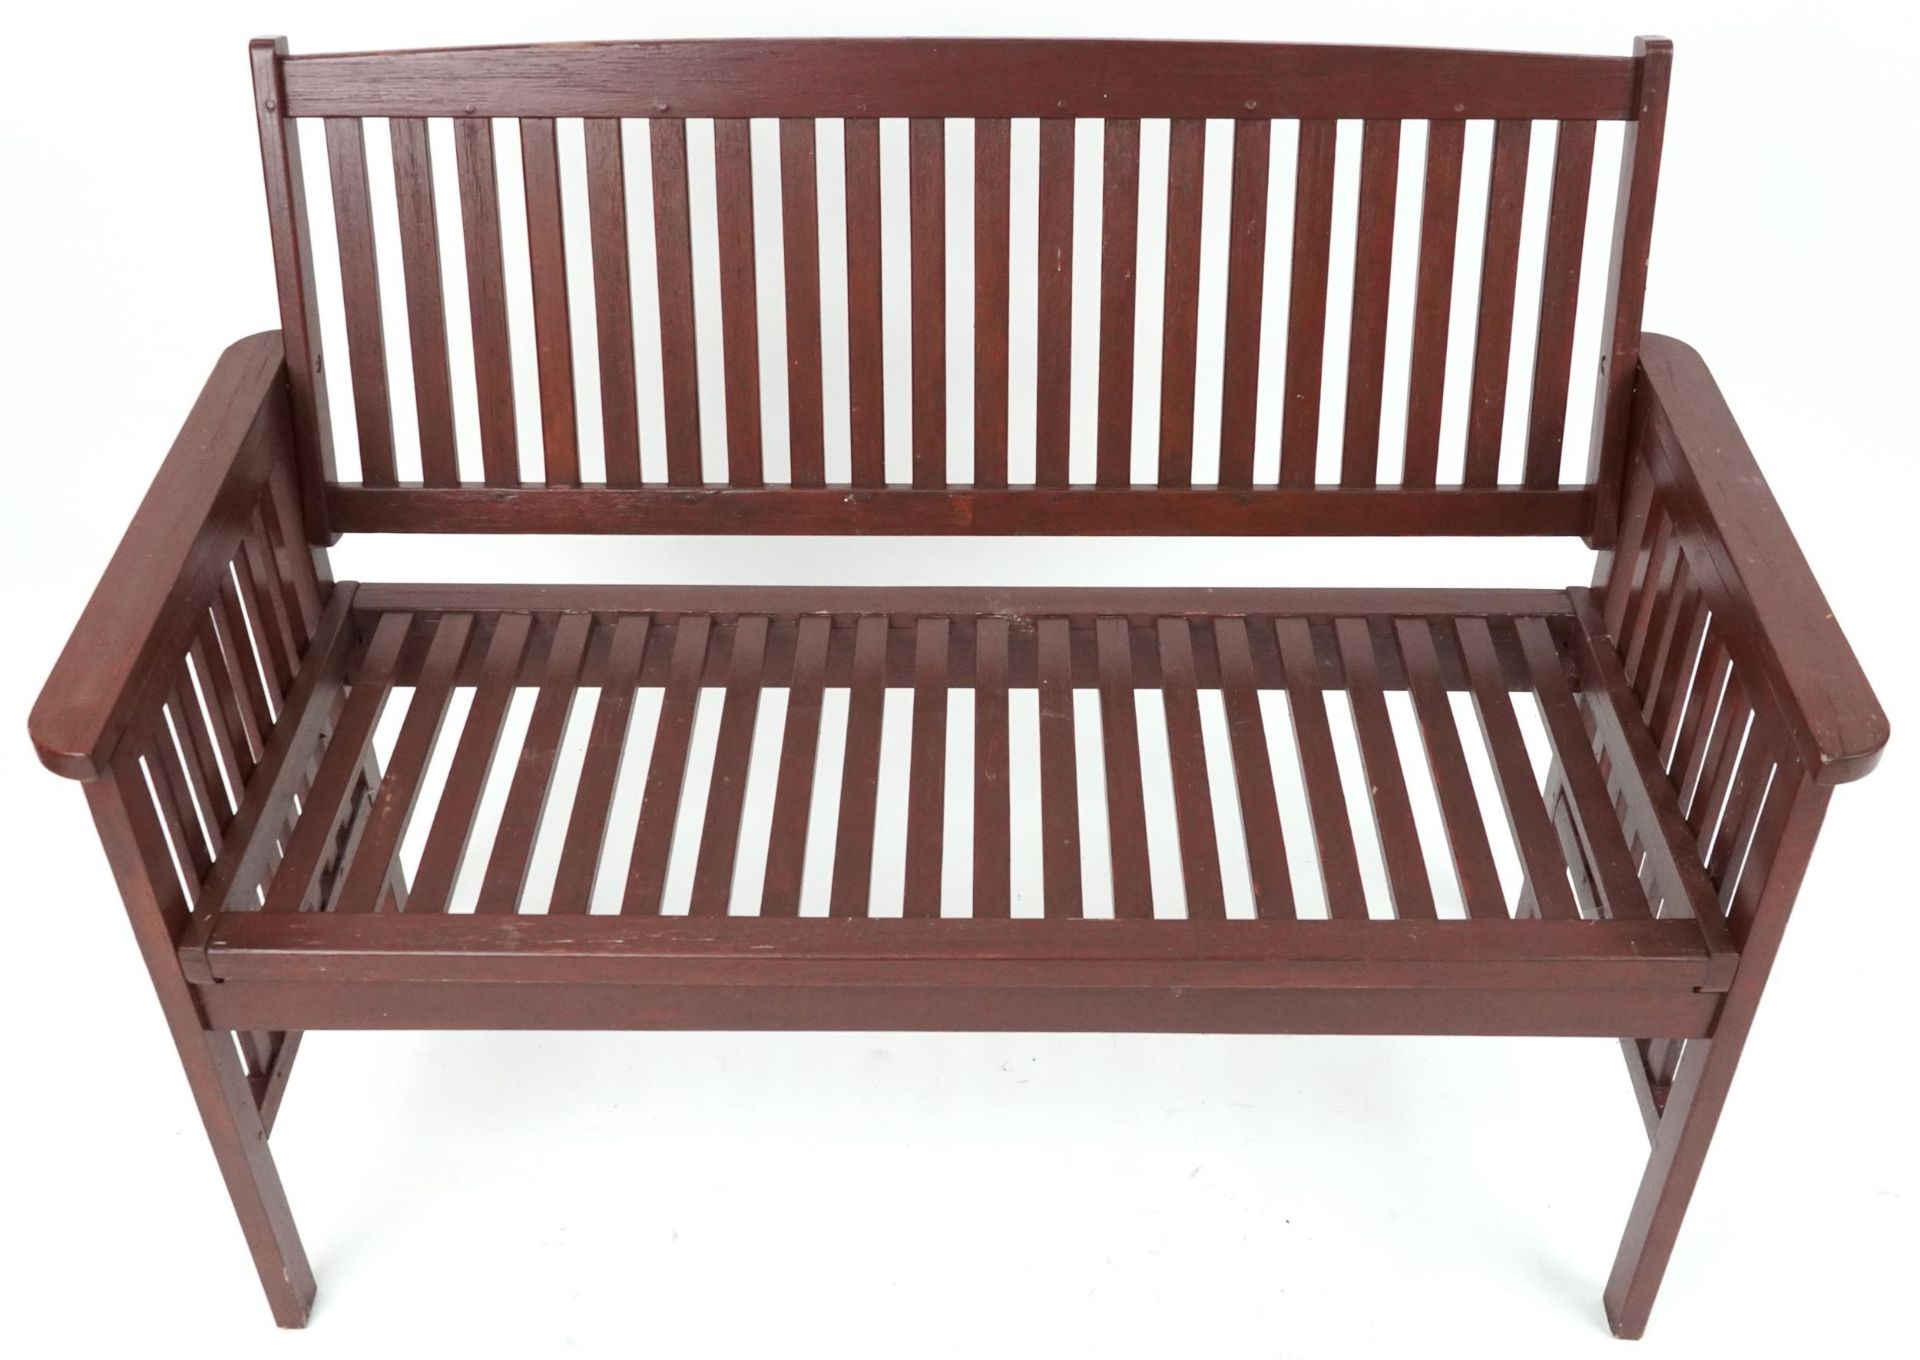 Stained teak slatted garden bench, 89cm H x 118.5cm W x 58cm D - Image 3 of 5